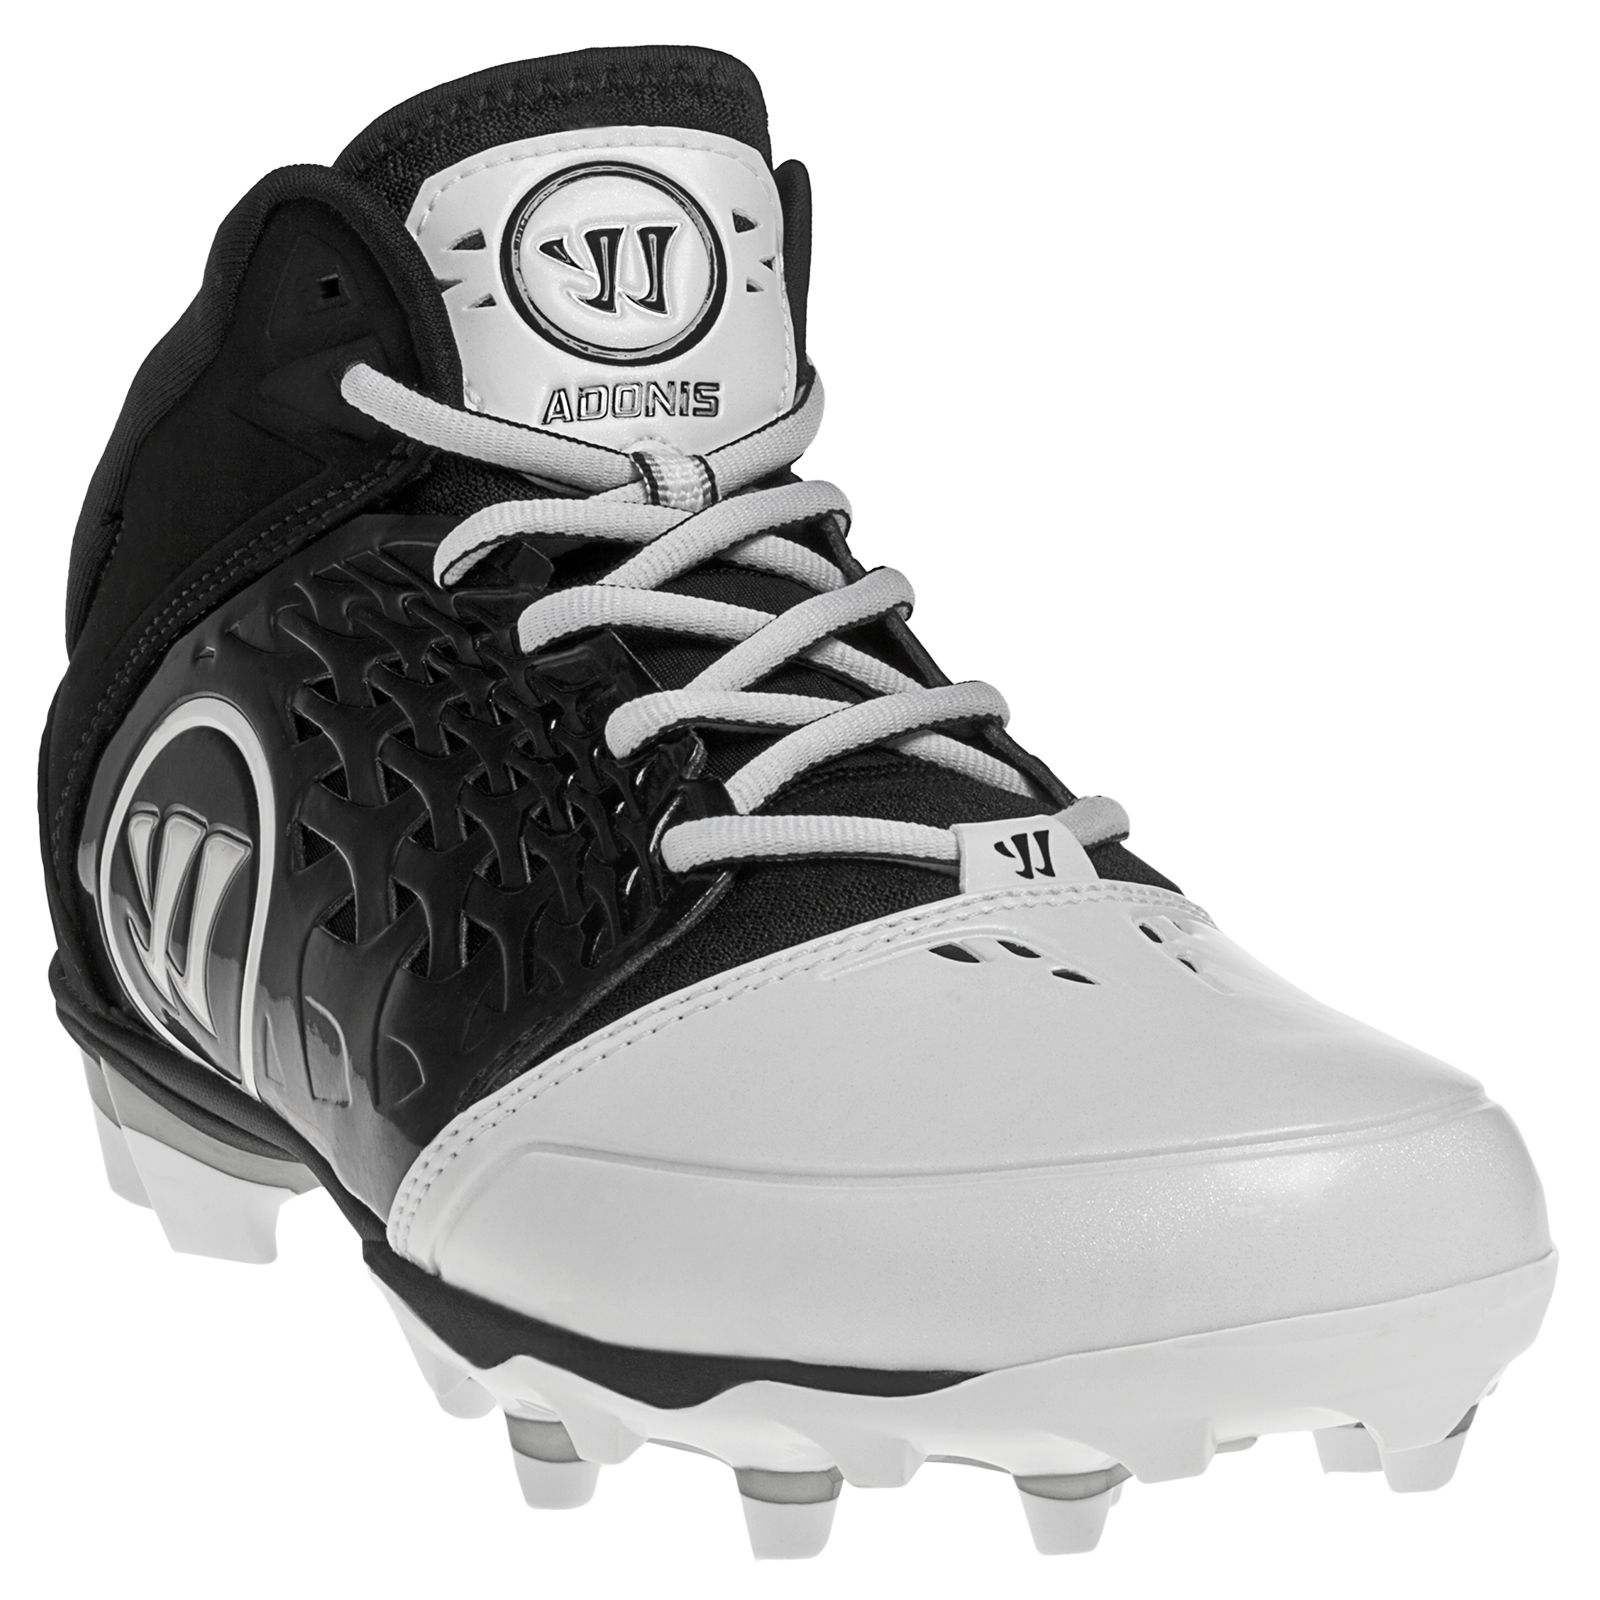 Adonis Cleat, White with Black image number 2